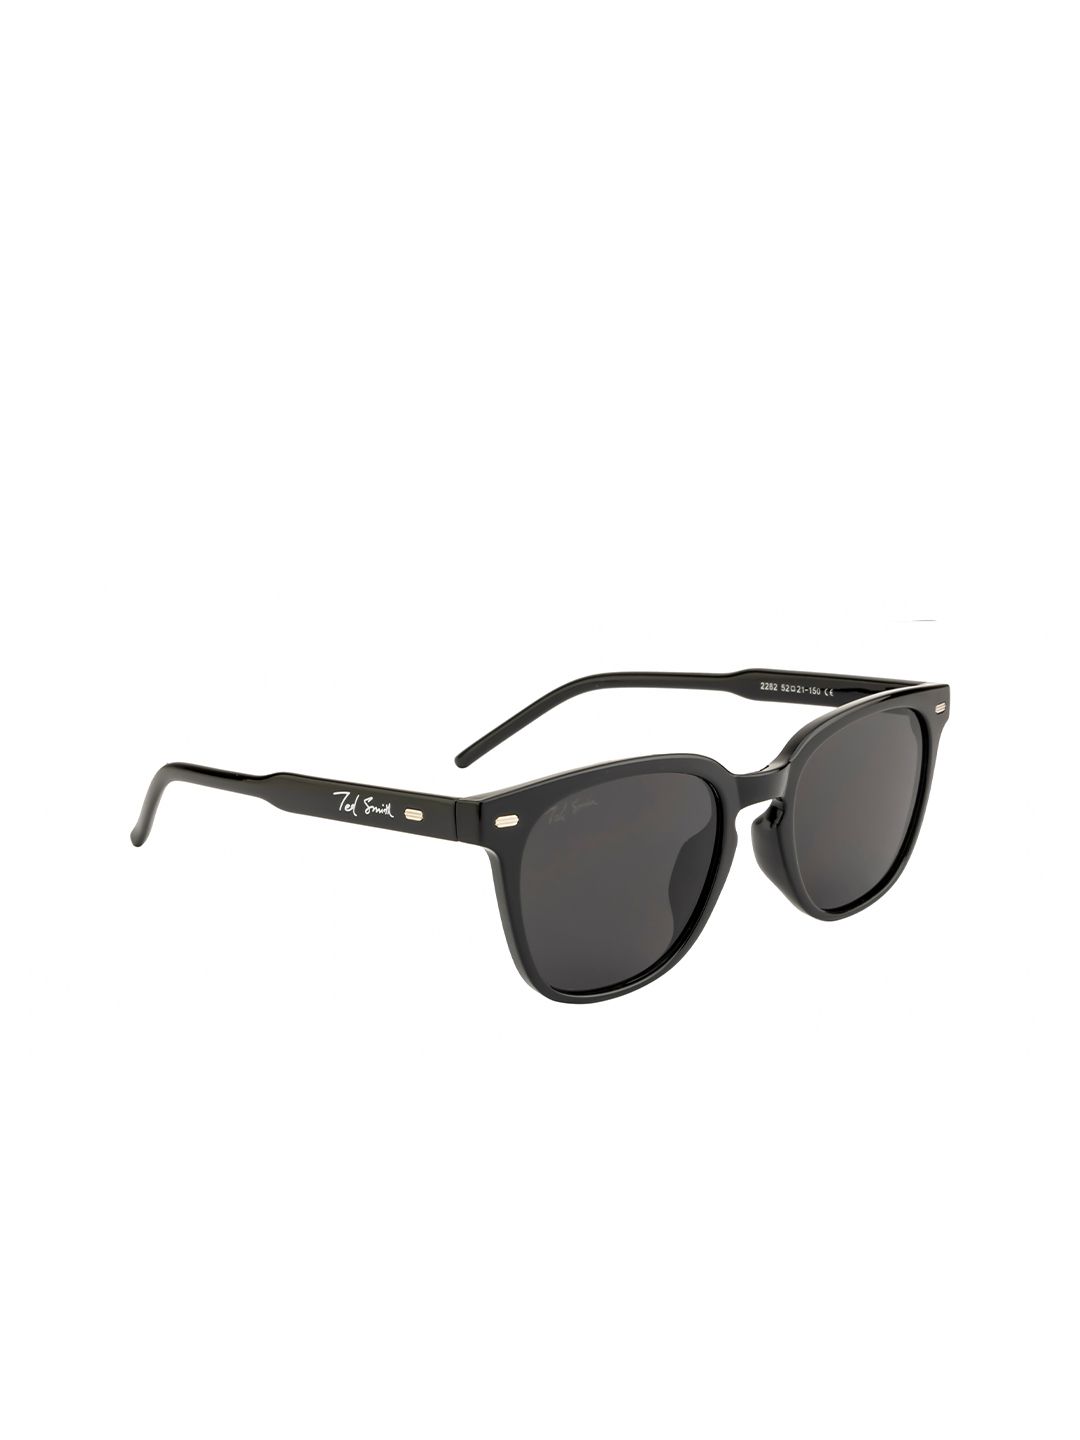 Ted Smith Unisex Grey Lens & Black Wayfarer Sunglasses with UV Protected Lens Price in India